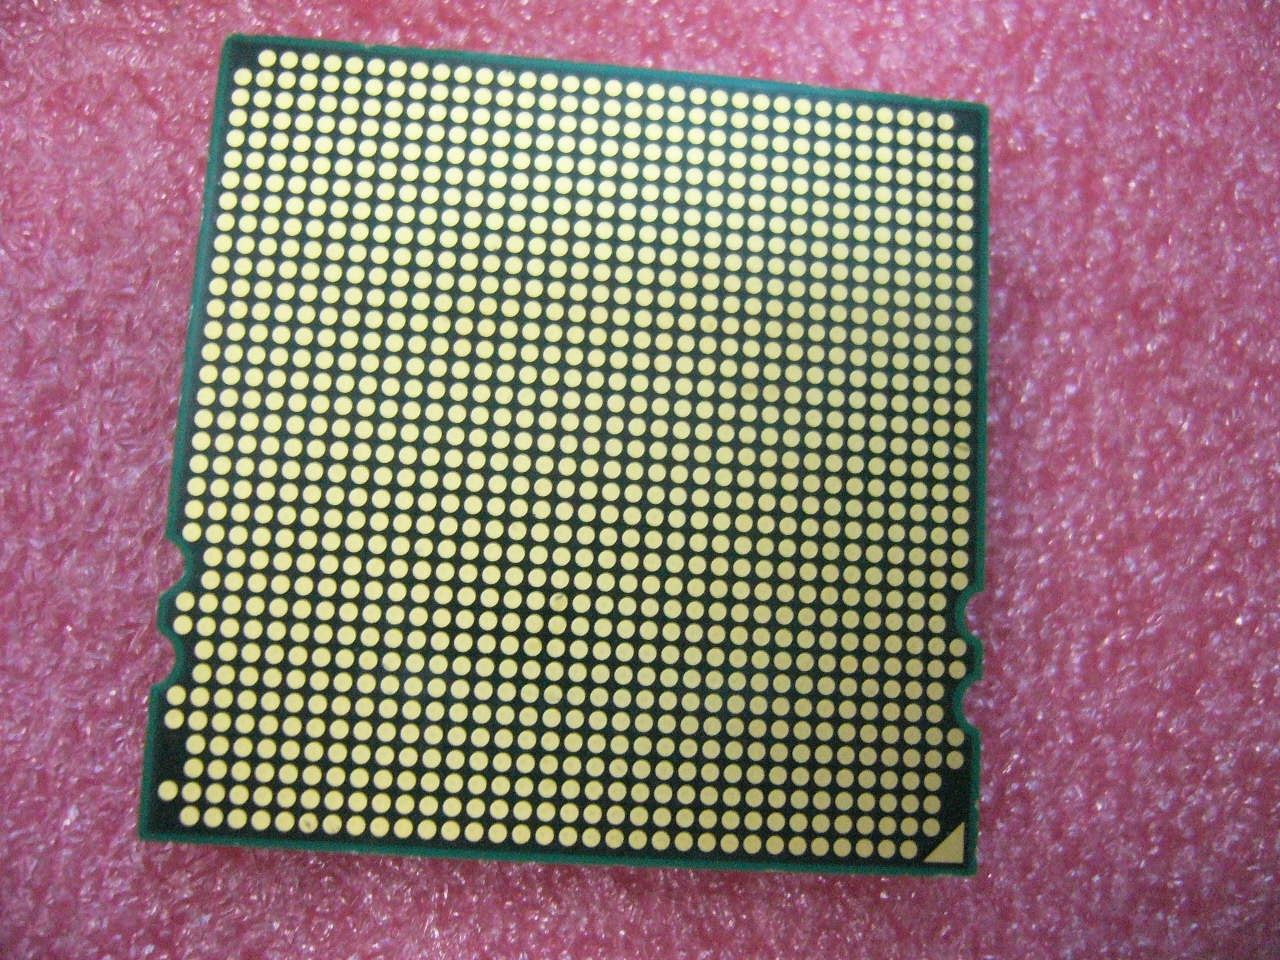 QTY 1x AMD Opteron 2419 EE 1.8 GHz Six Core (OS2419NBS6DGN) CPU Socket F 1207 - Click Image to Close